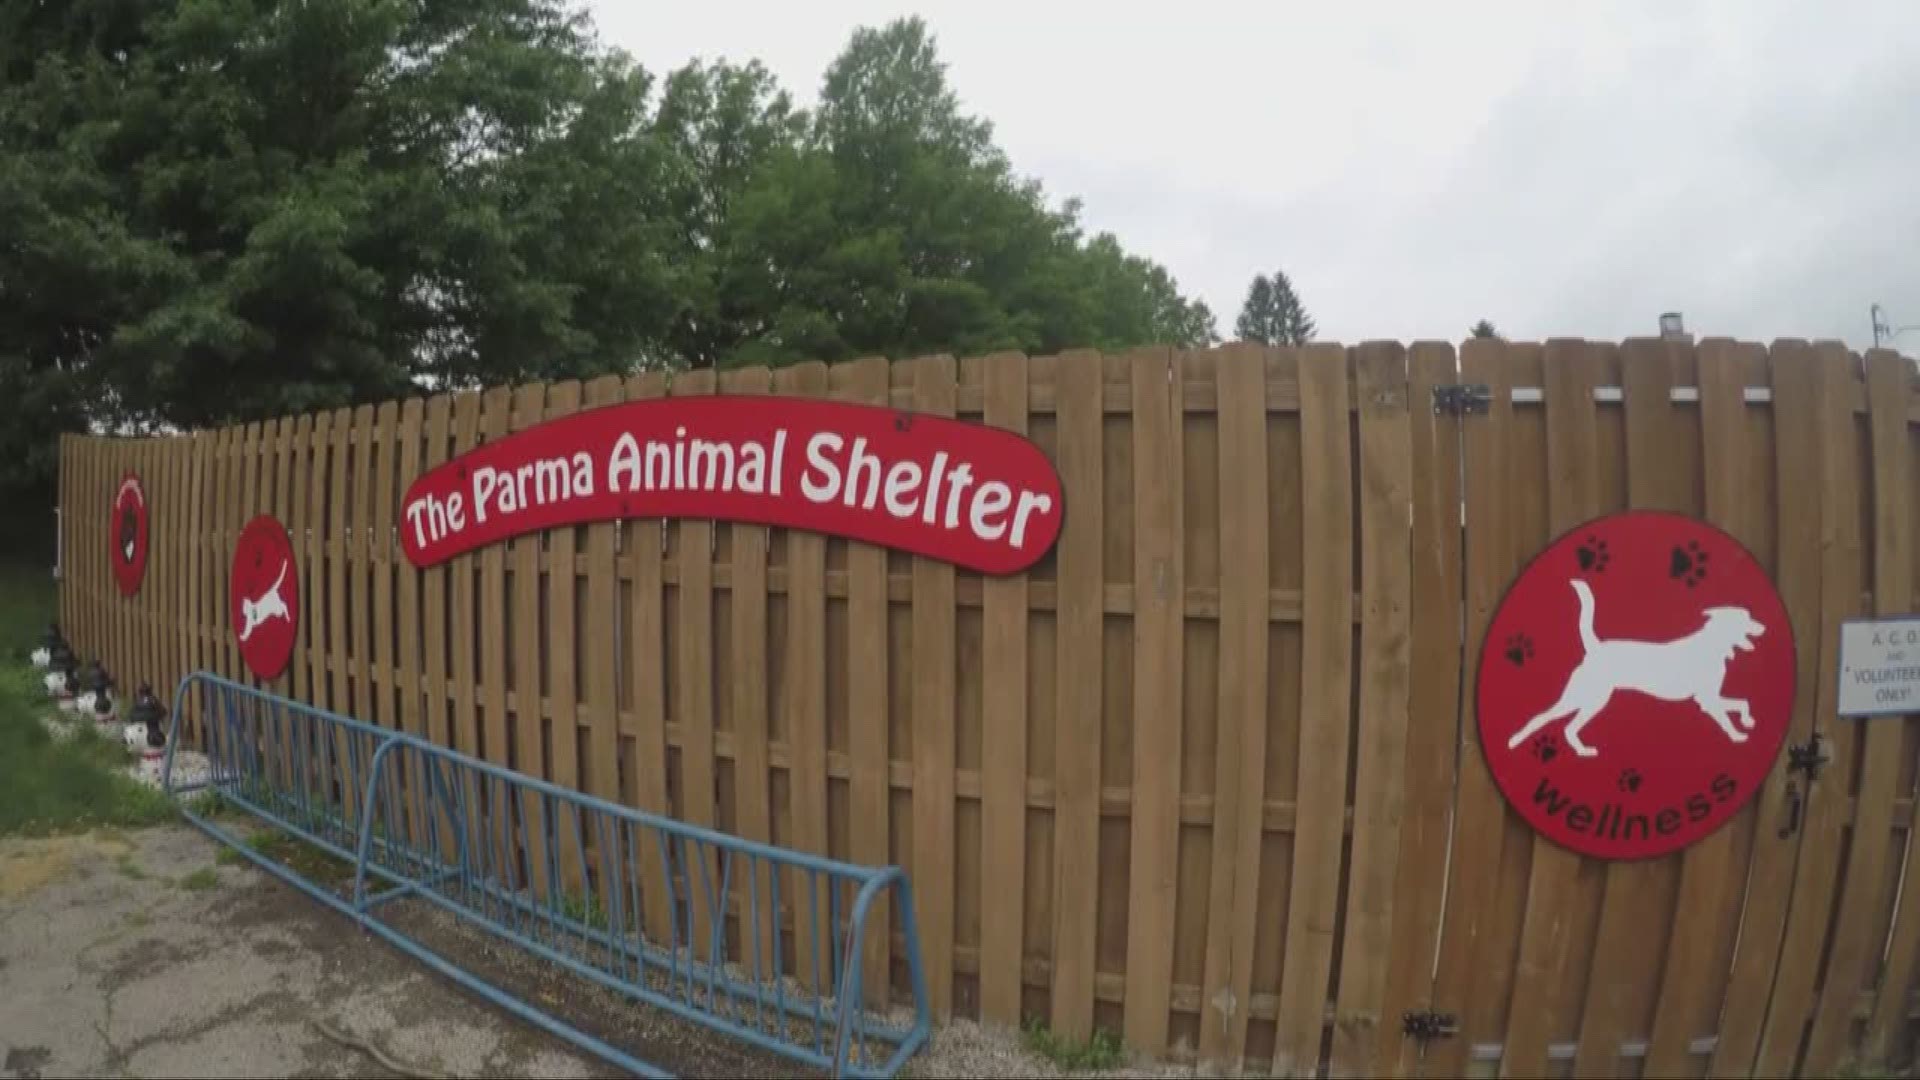 Two local shelters are closed: Should dog owners be concerned?